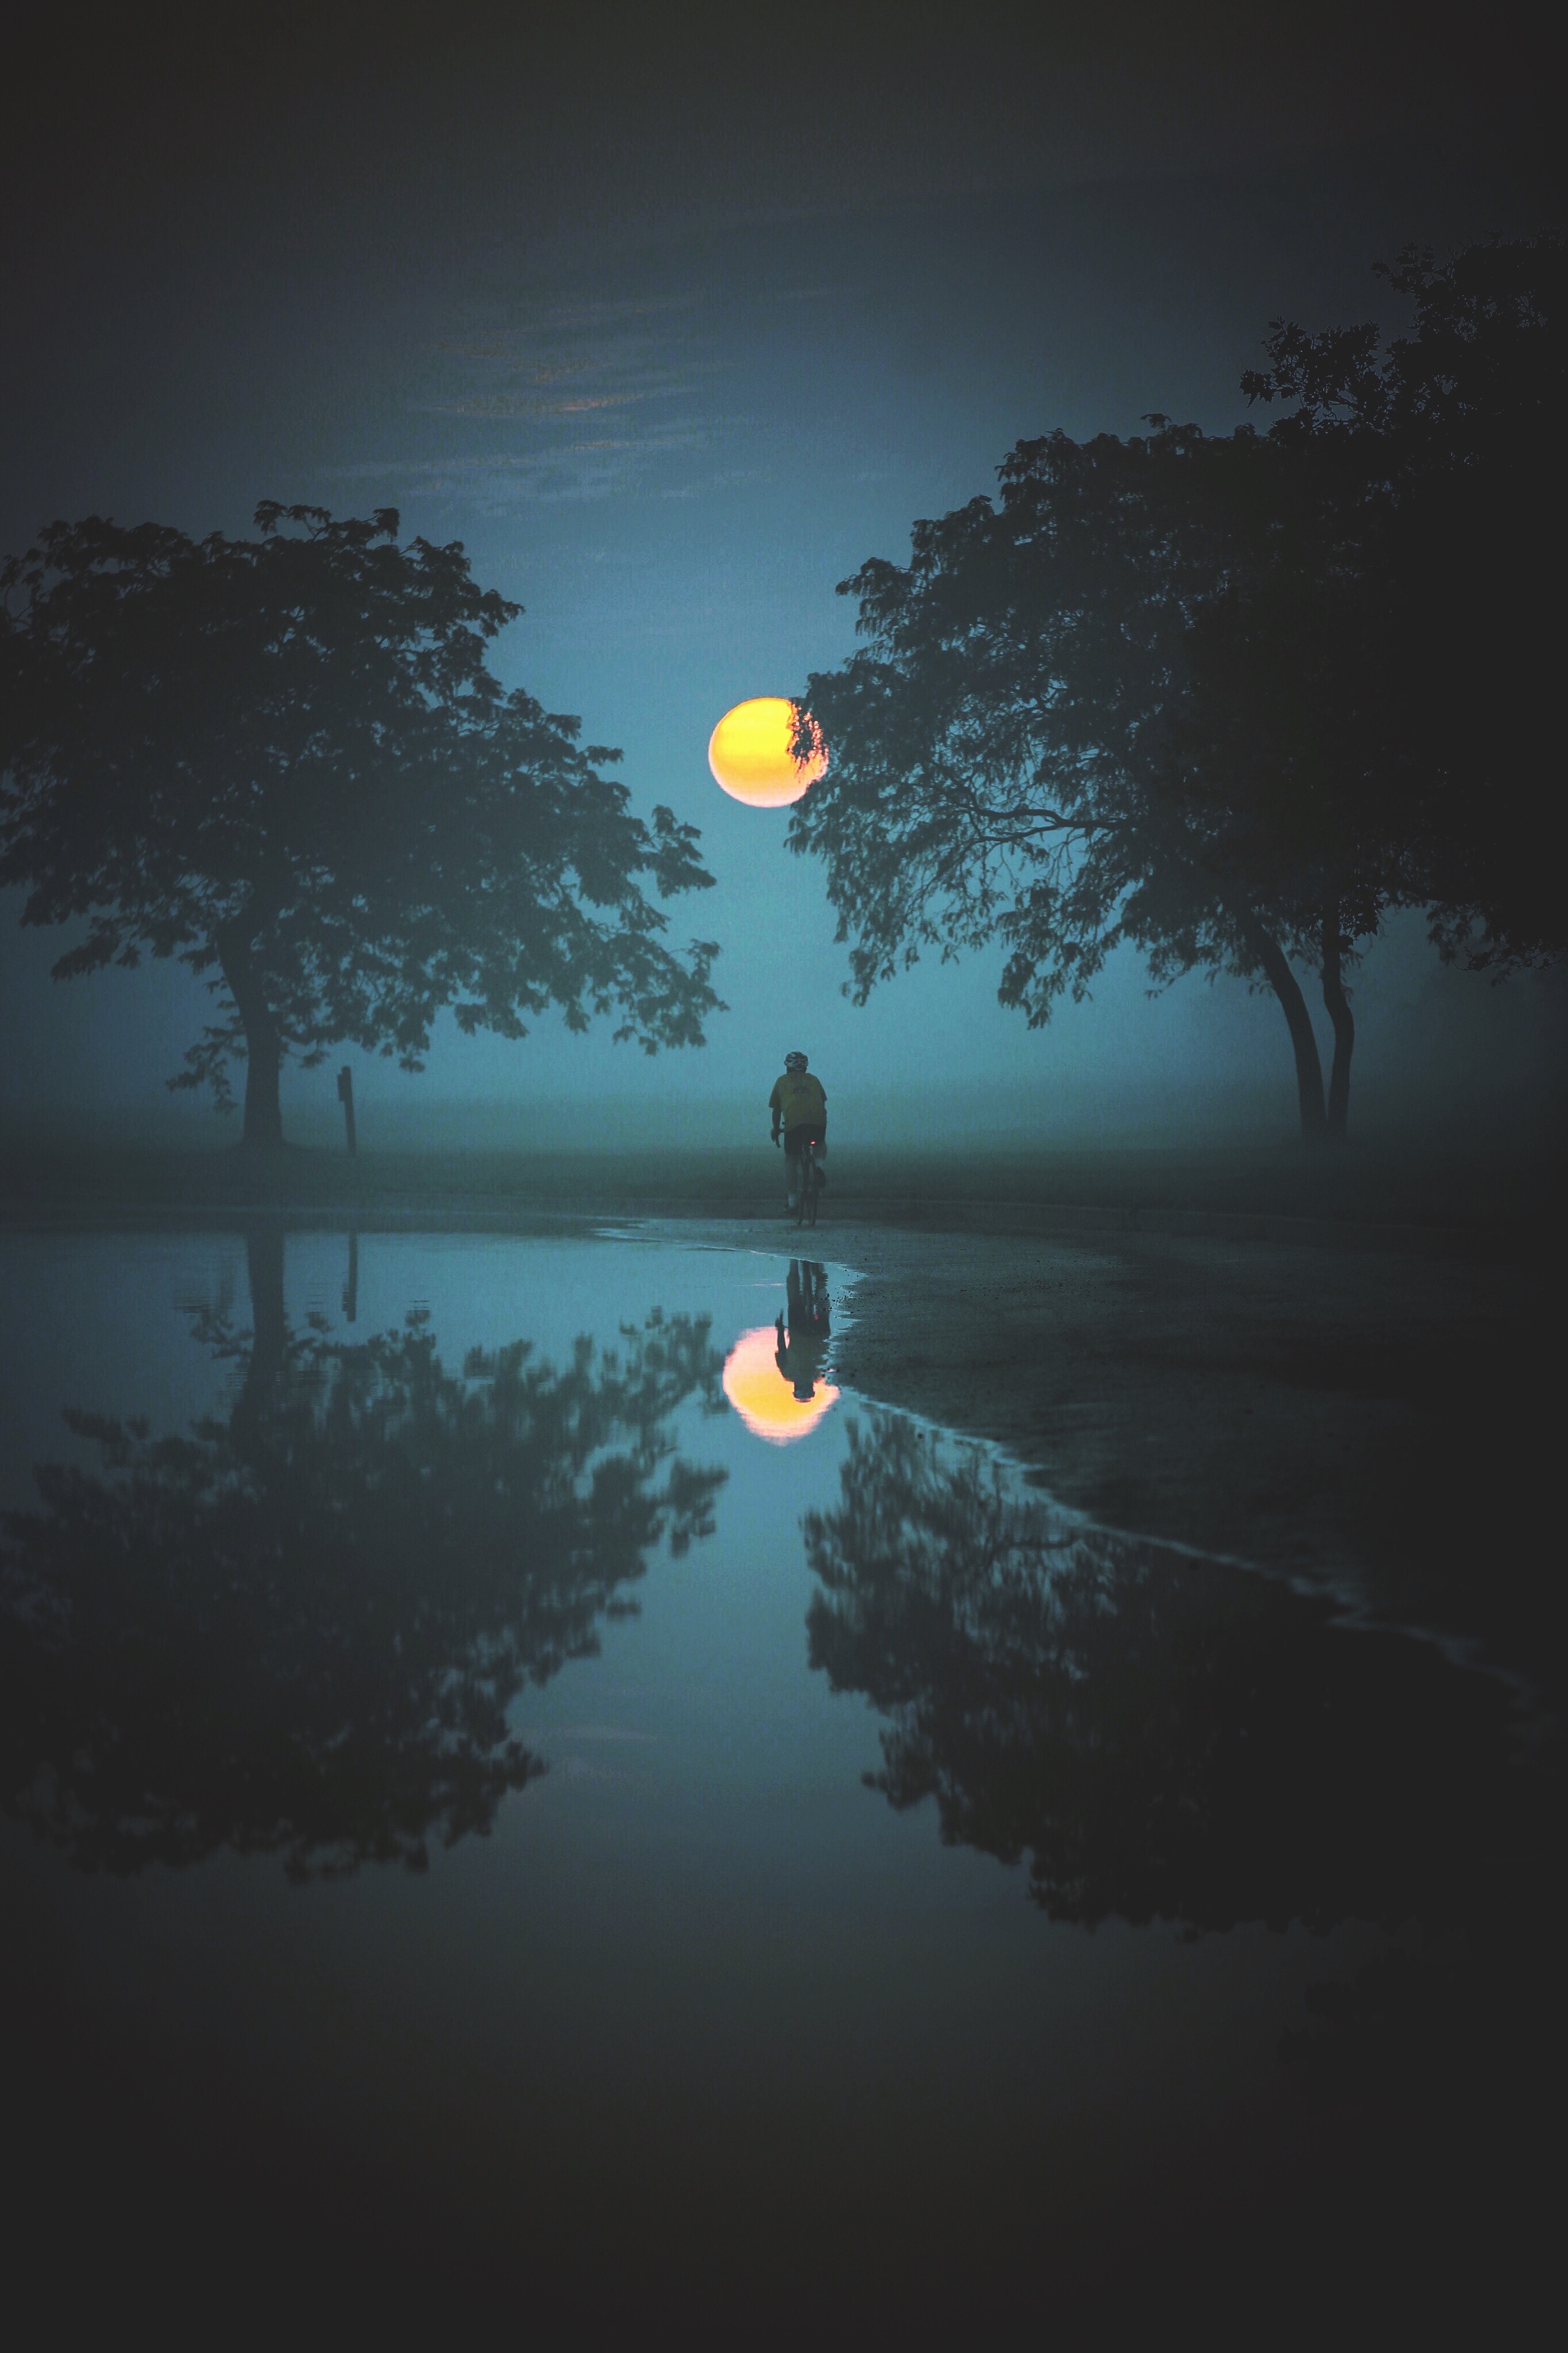 reflection, moon, nature, water, trees, fog, cyclist